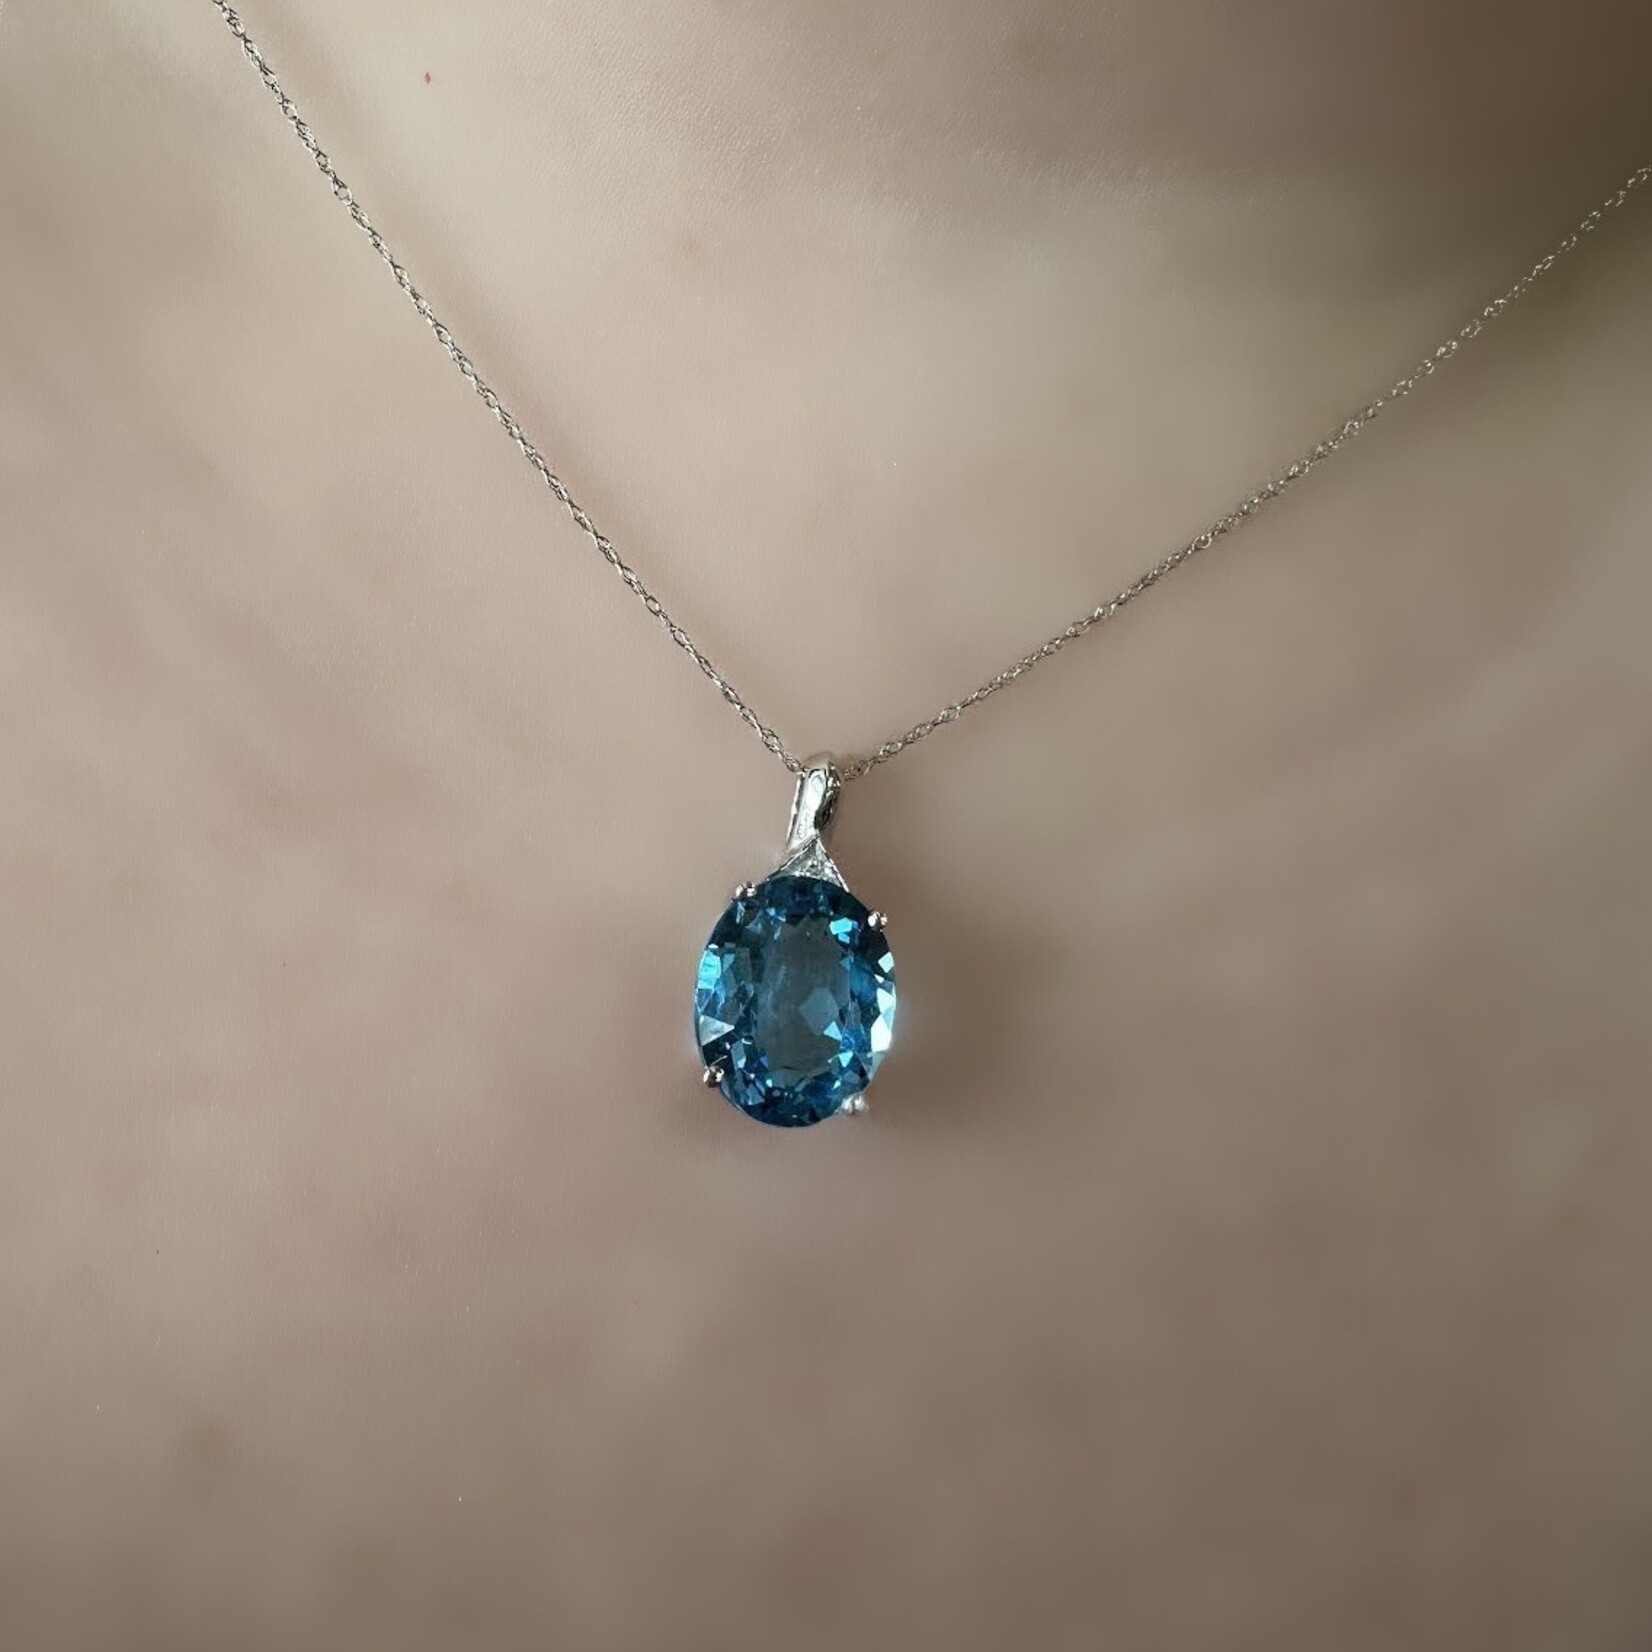 10k White Gold Oval Blue Topaz Pendant with Chain